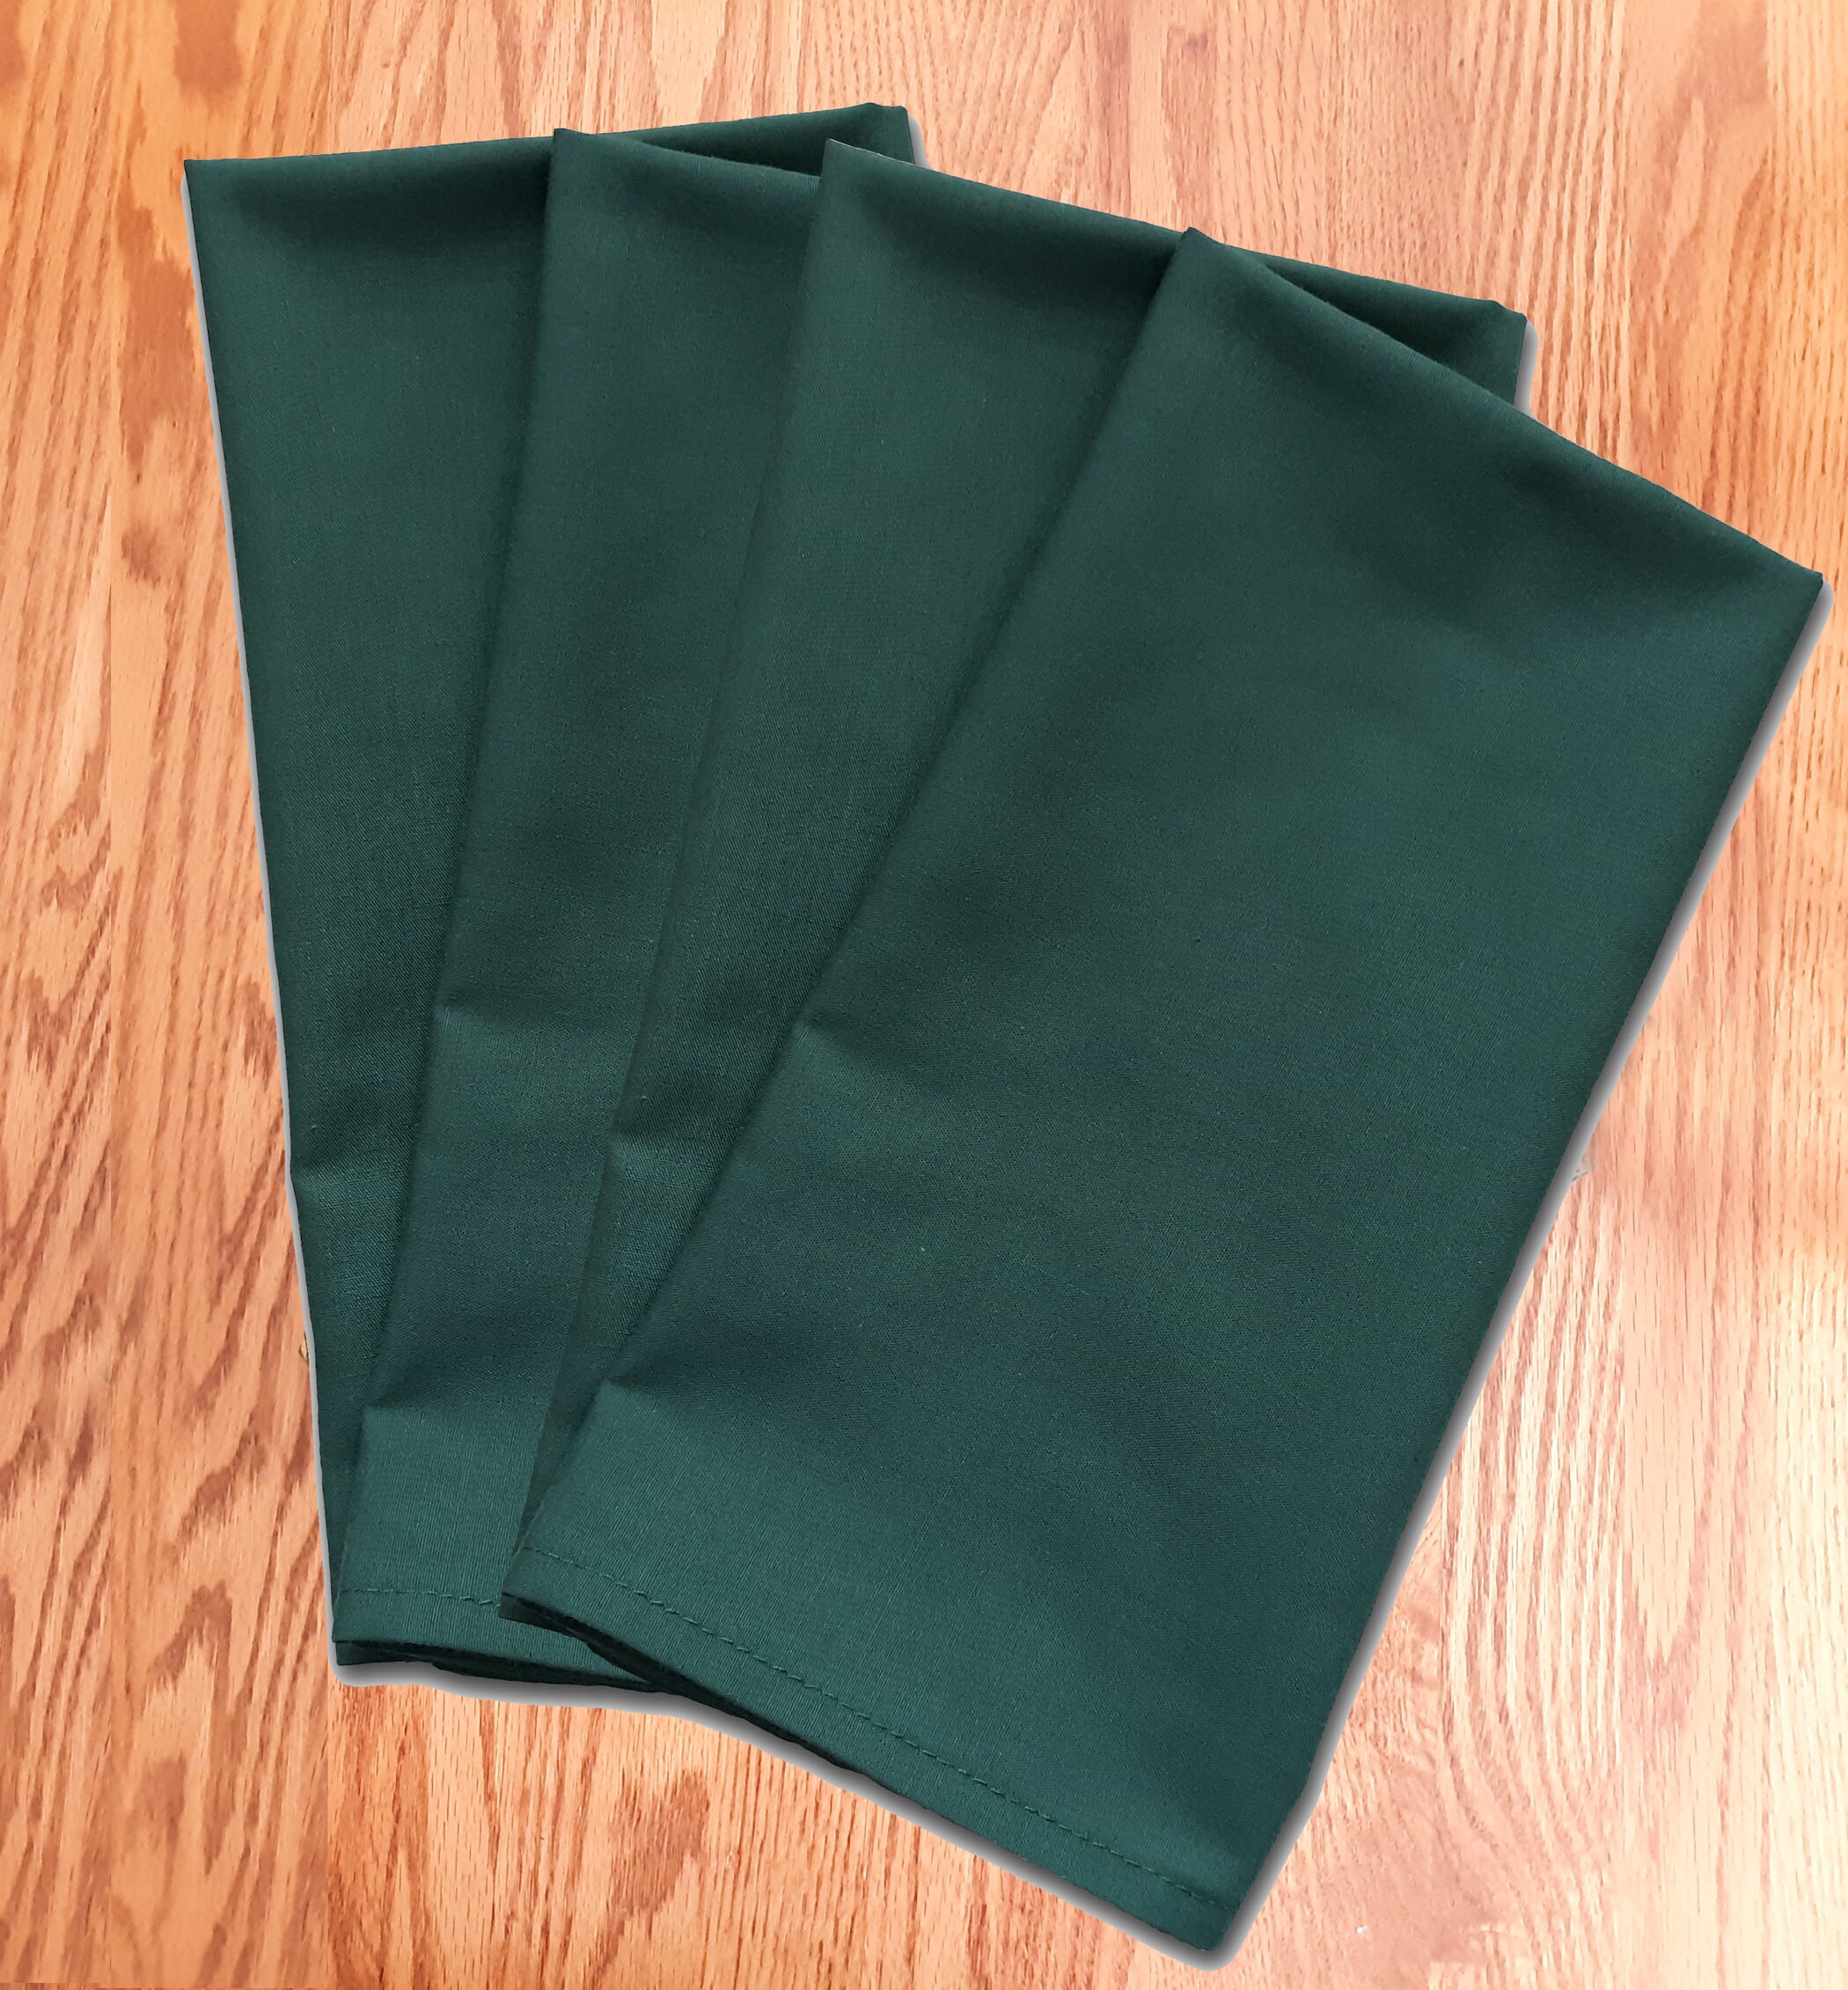 Terry Cloth Hunter Green 45 Wide Absorbent Cotton Fabric by the Yard  (2391R-1F-green) 